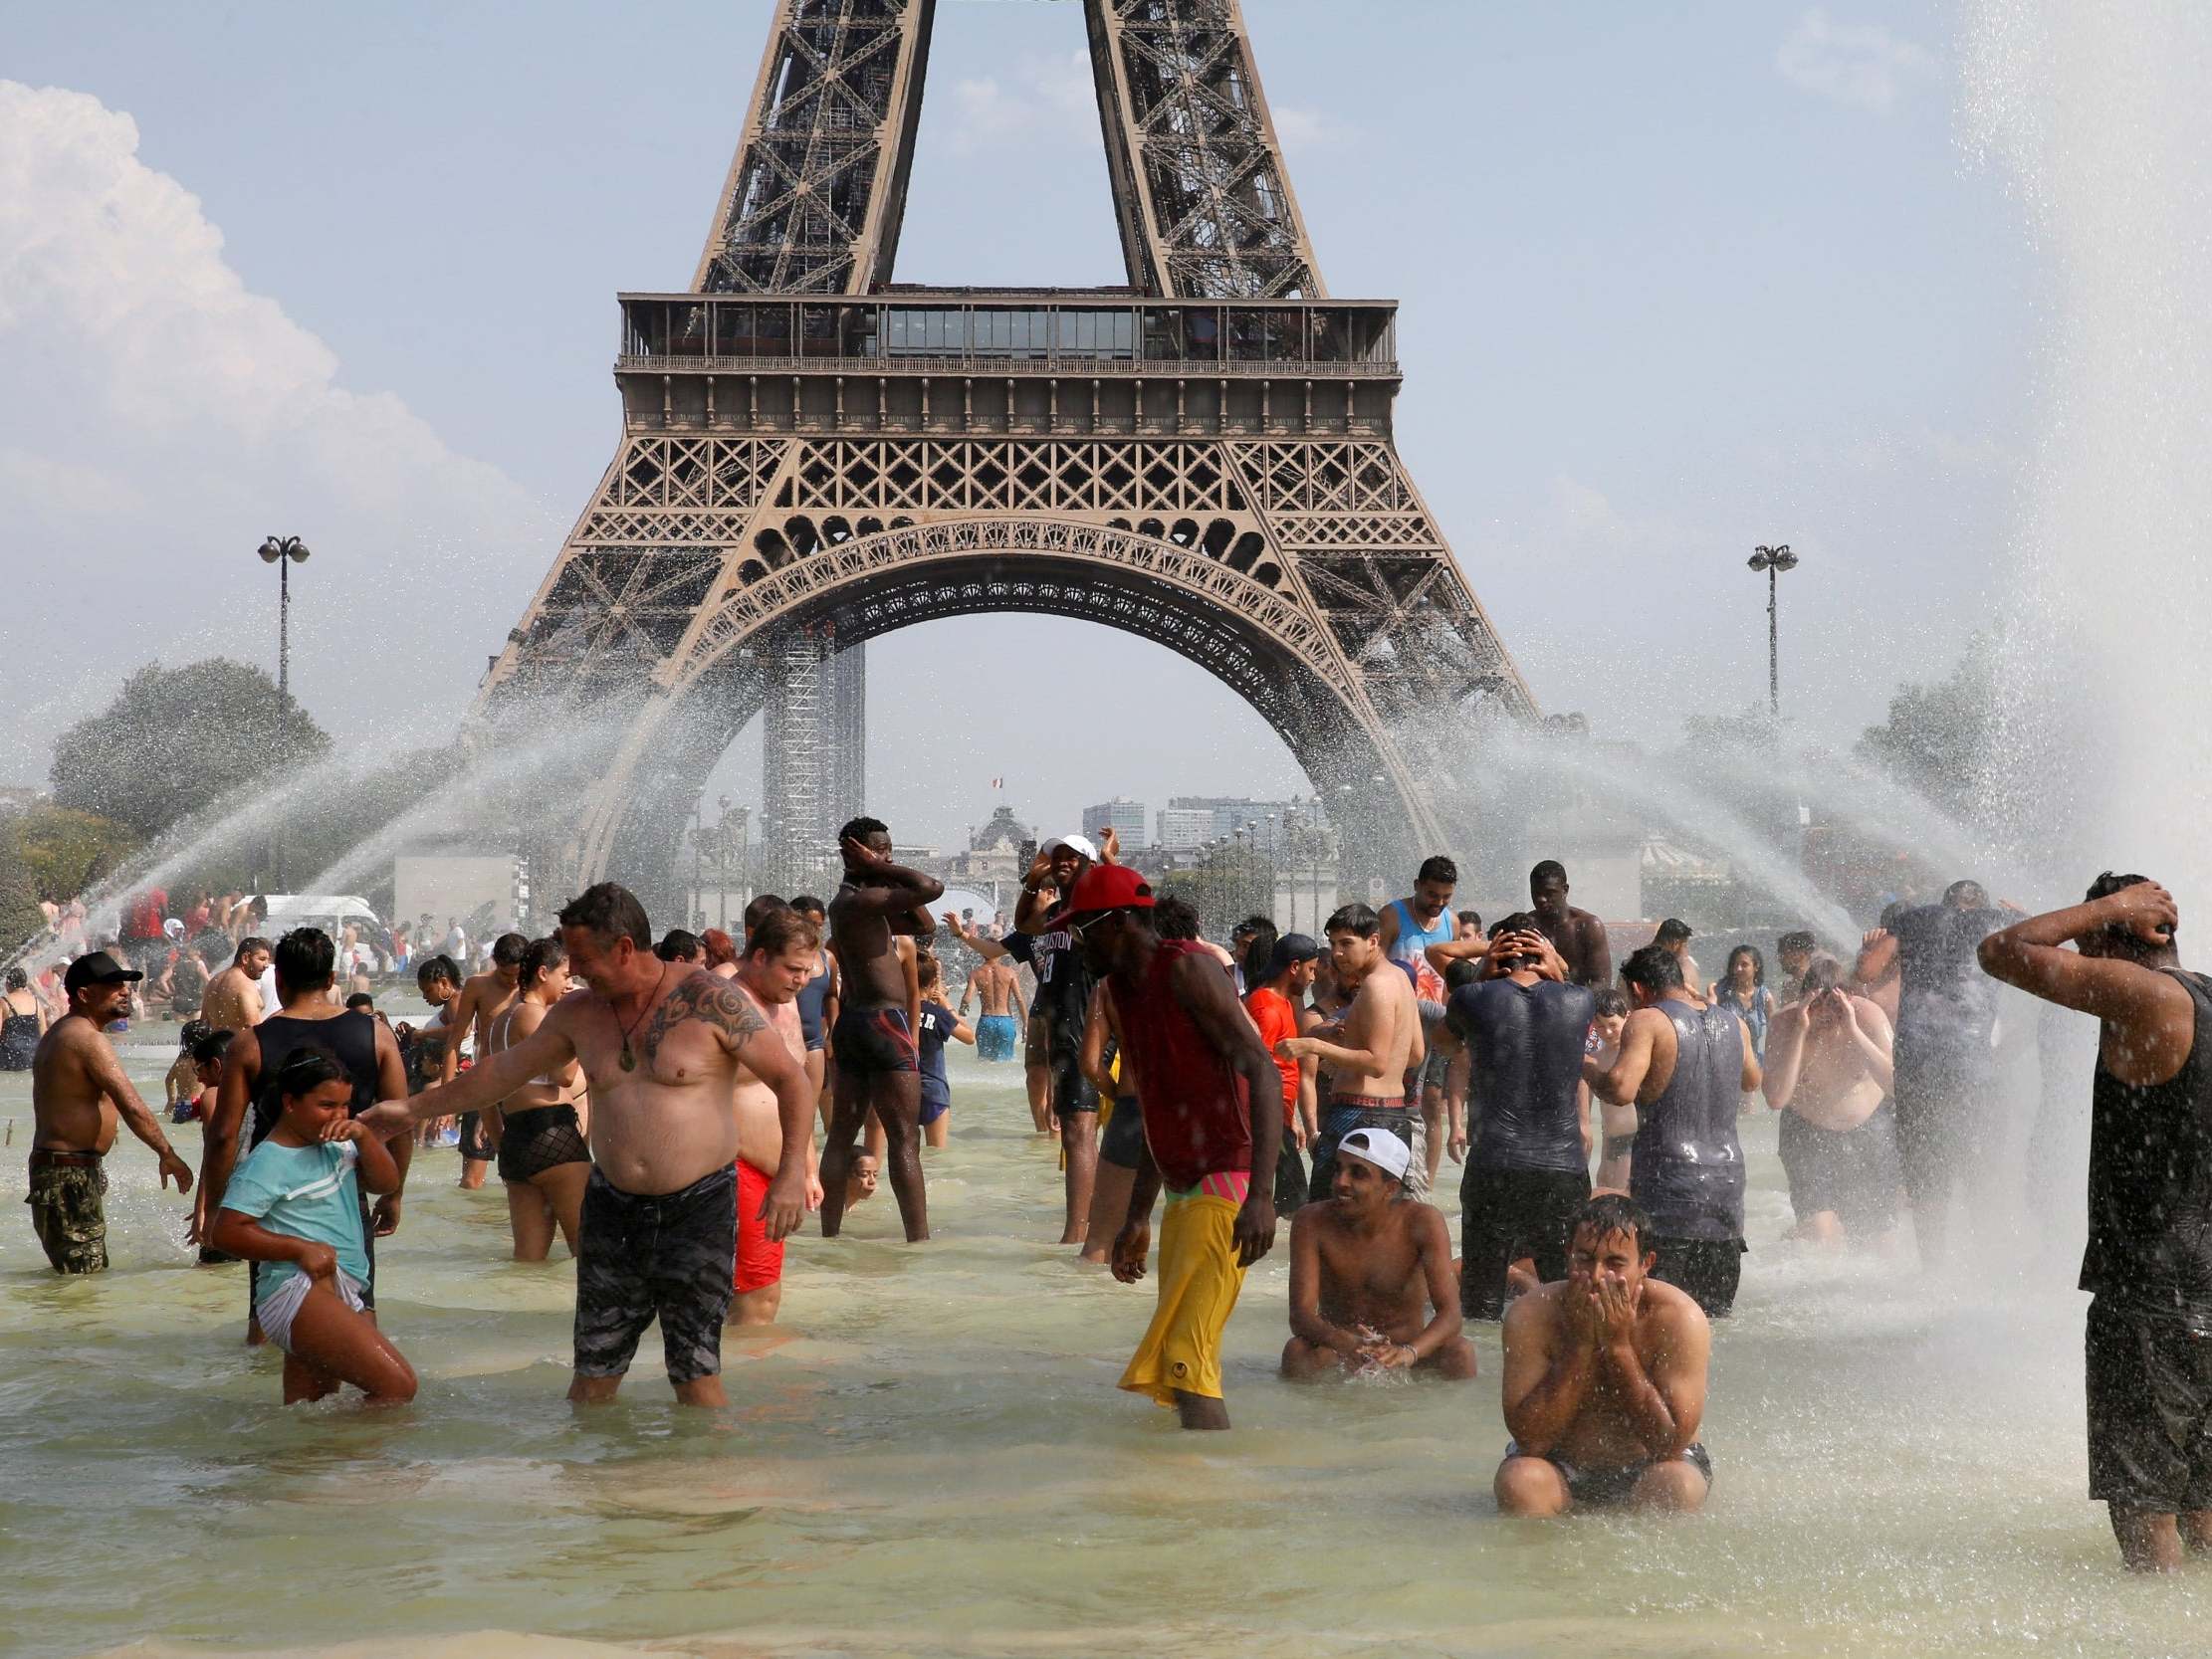 People cool off in the Trocadero fountains across from the Eiffel Tower in Paris